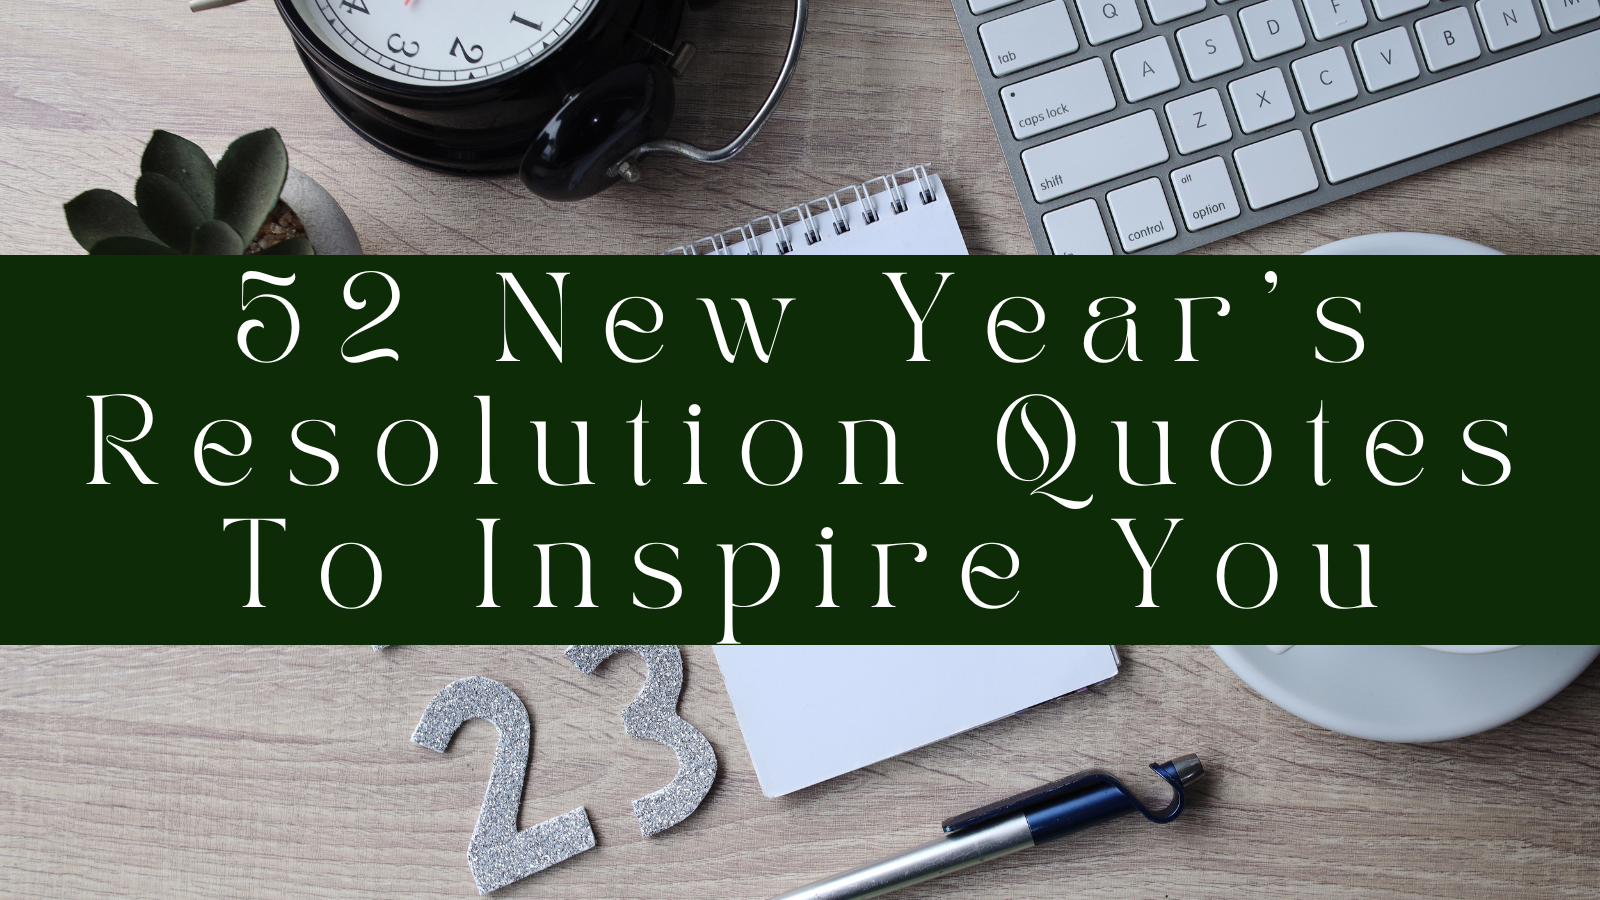 52 New Year’s Resolution Quotes To Inspire You